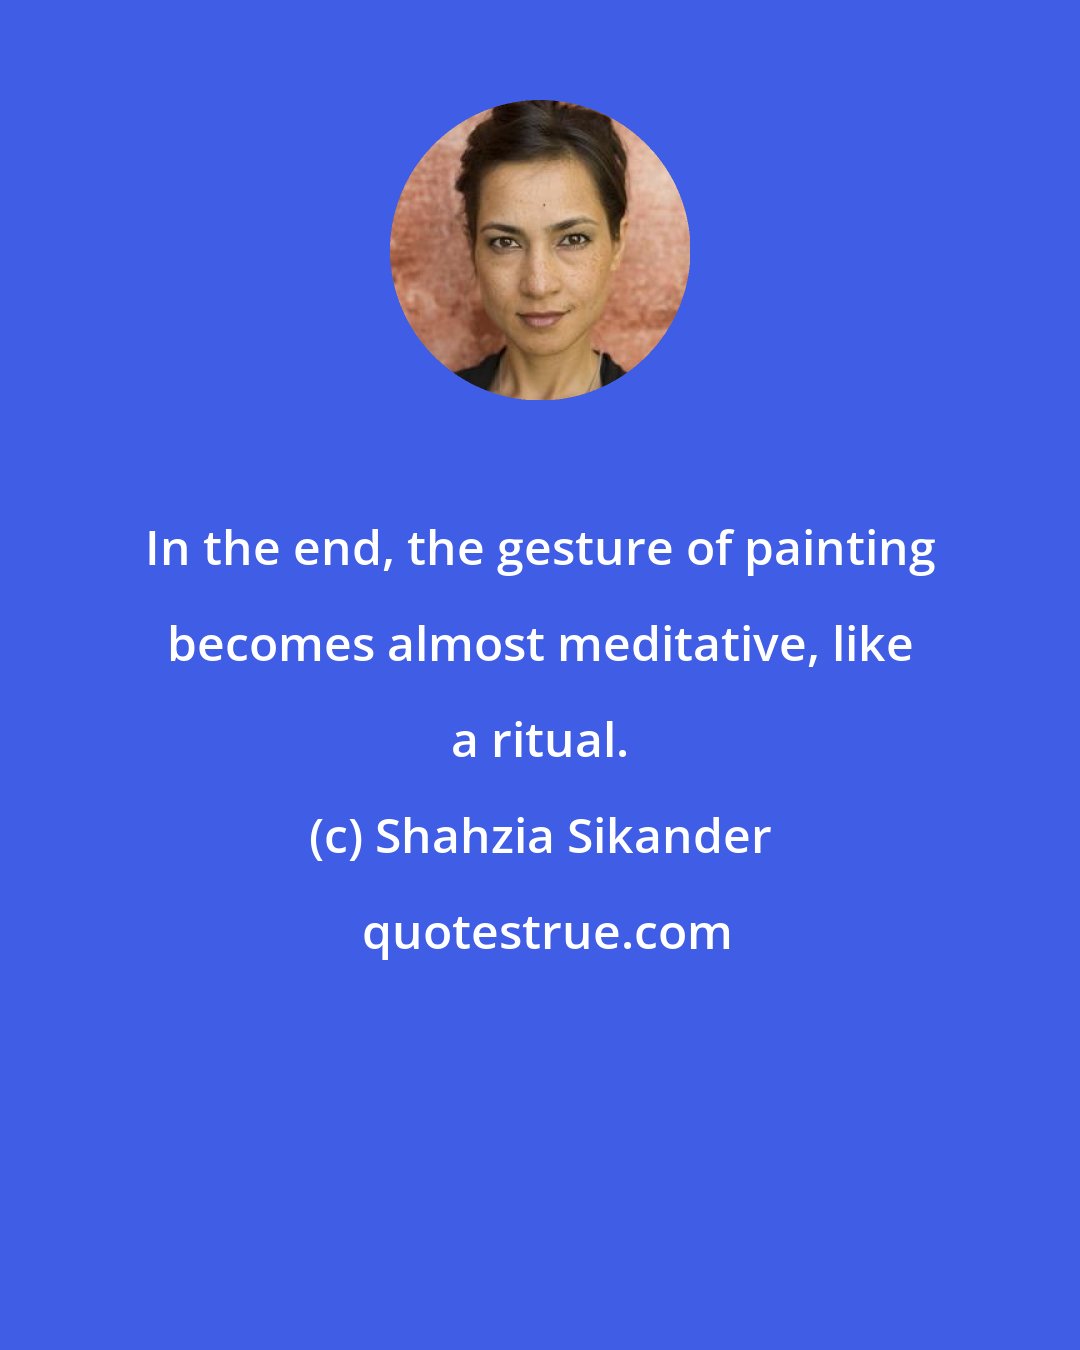 Shahzia Sikander: In the end, the gesture of painting becomes almost meditative, like a ritual.